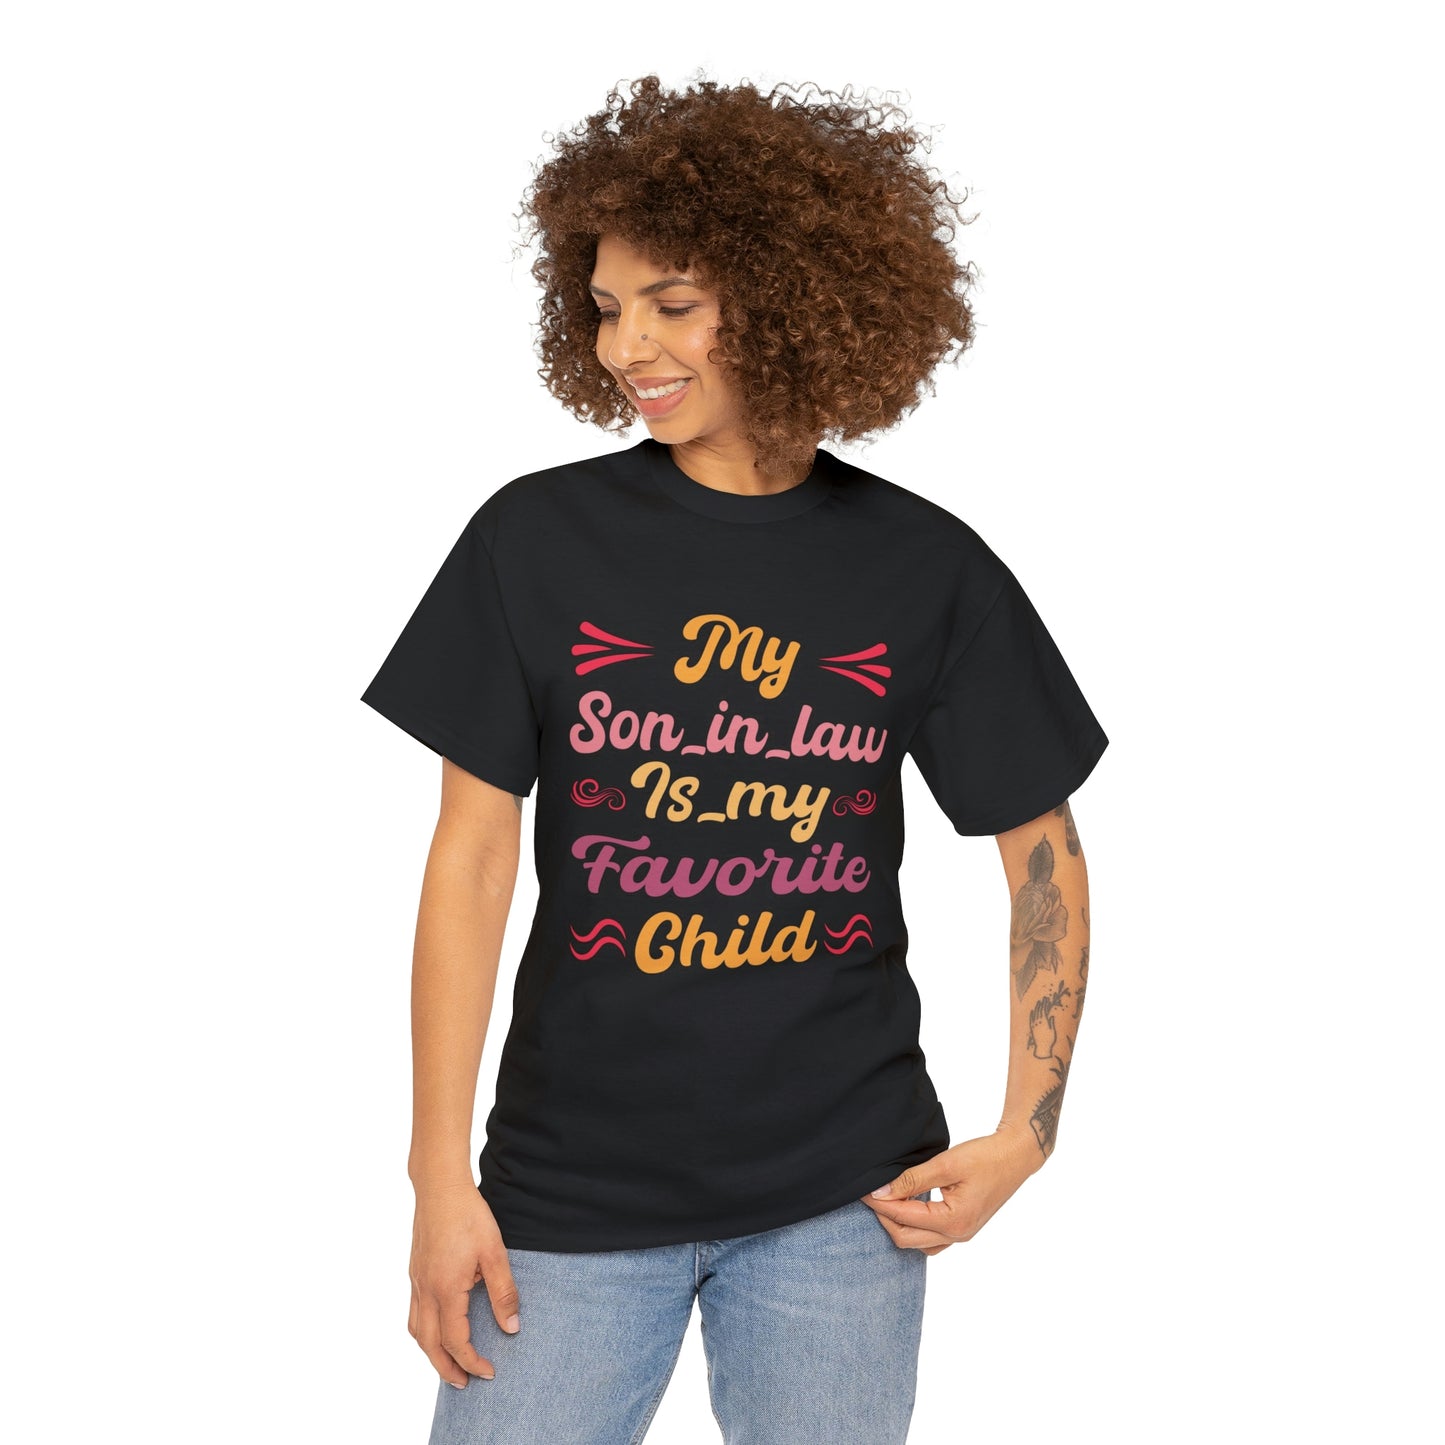 My son in law is favorite child- Heavy Cotton Tee